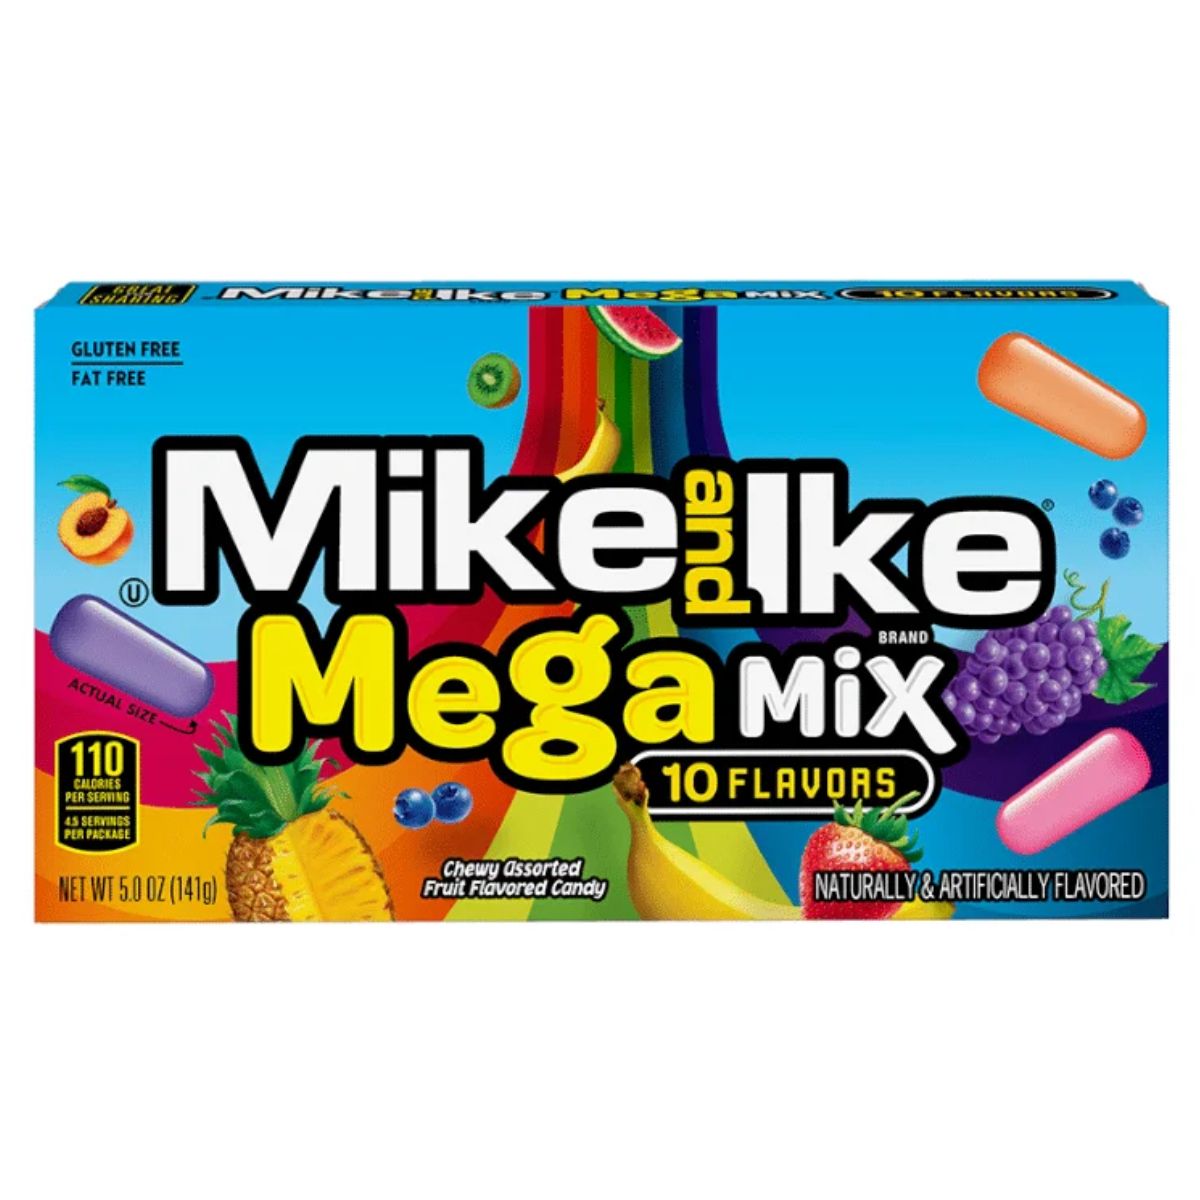 Mike likes Mike and Ike - Megamix - 141g flavors.